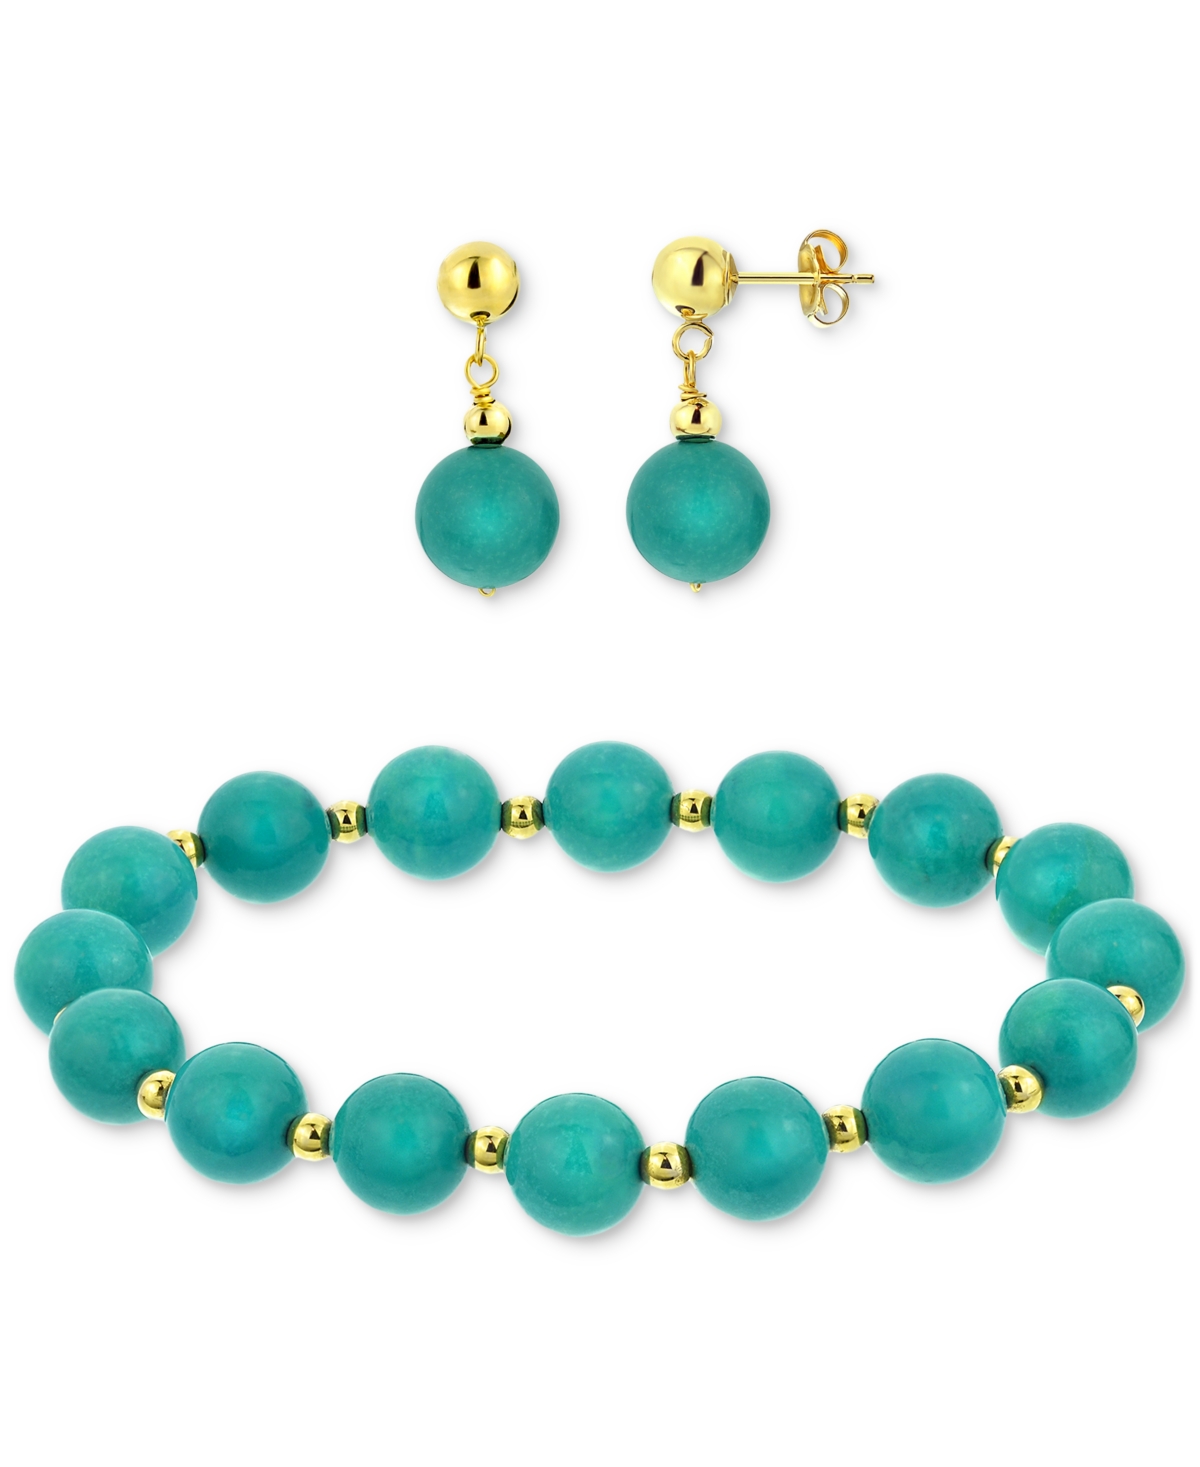 Macy's 2-pc. Set Jade Bead Bracelet & Matching Drop Earrings In 14k Gold (also In Onyx, Tiger Eye, Turquois In Turquoise